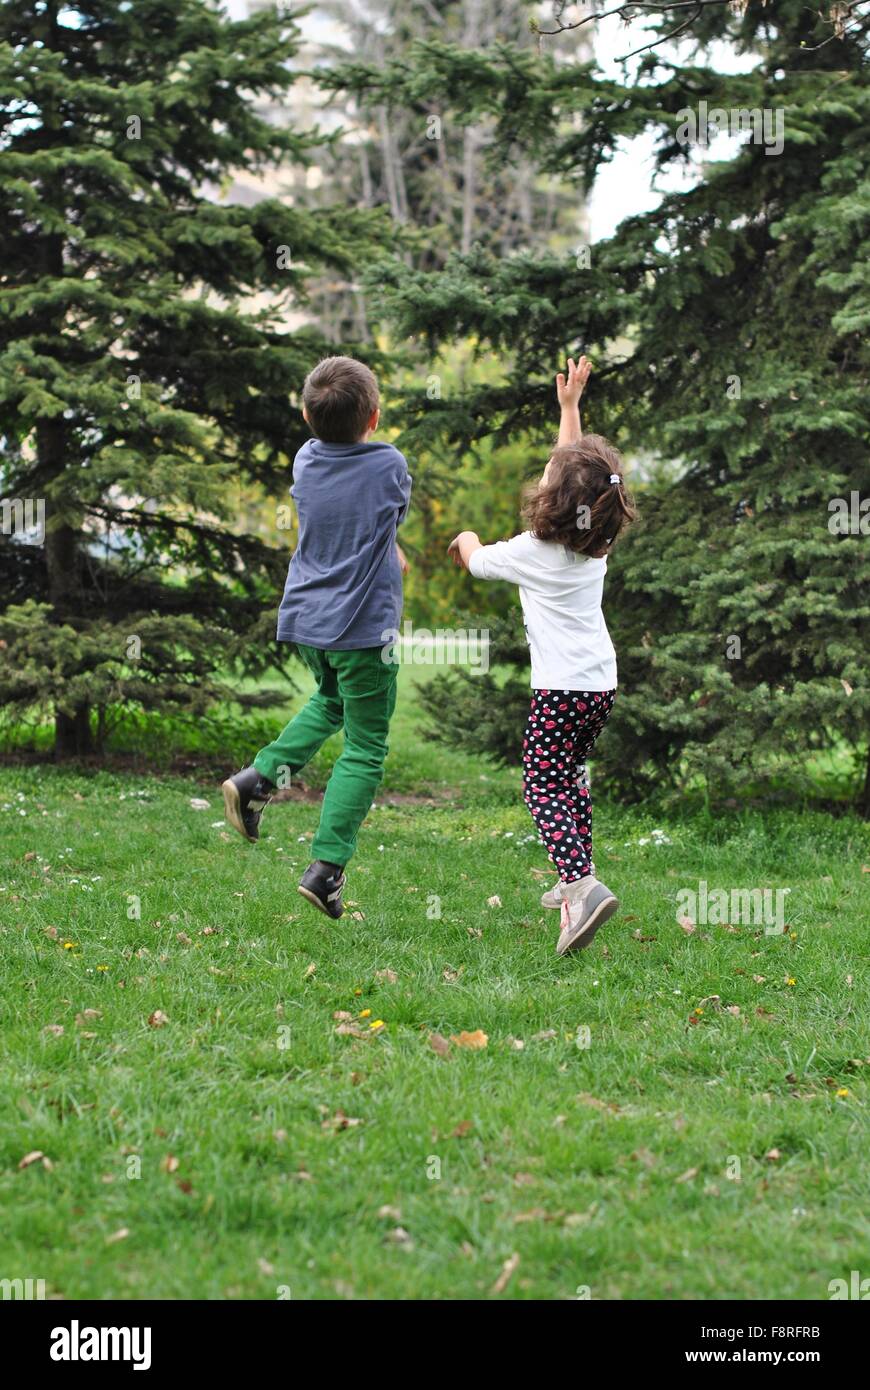 Boy and girl jumping after soap bubbles Stock Photo